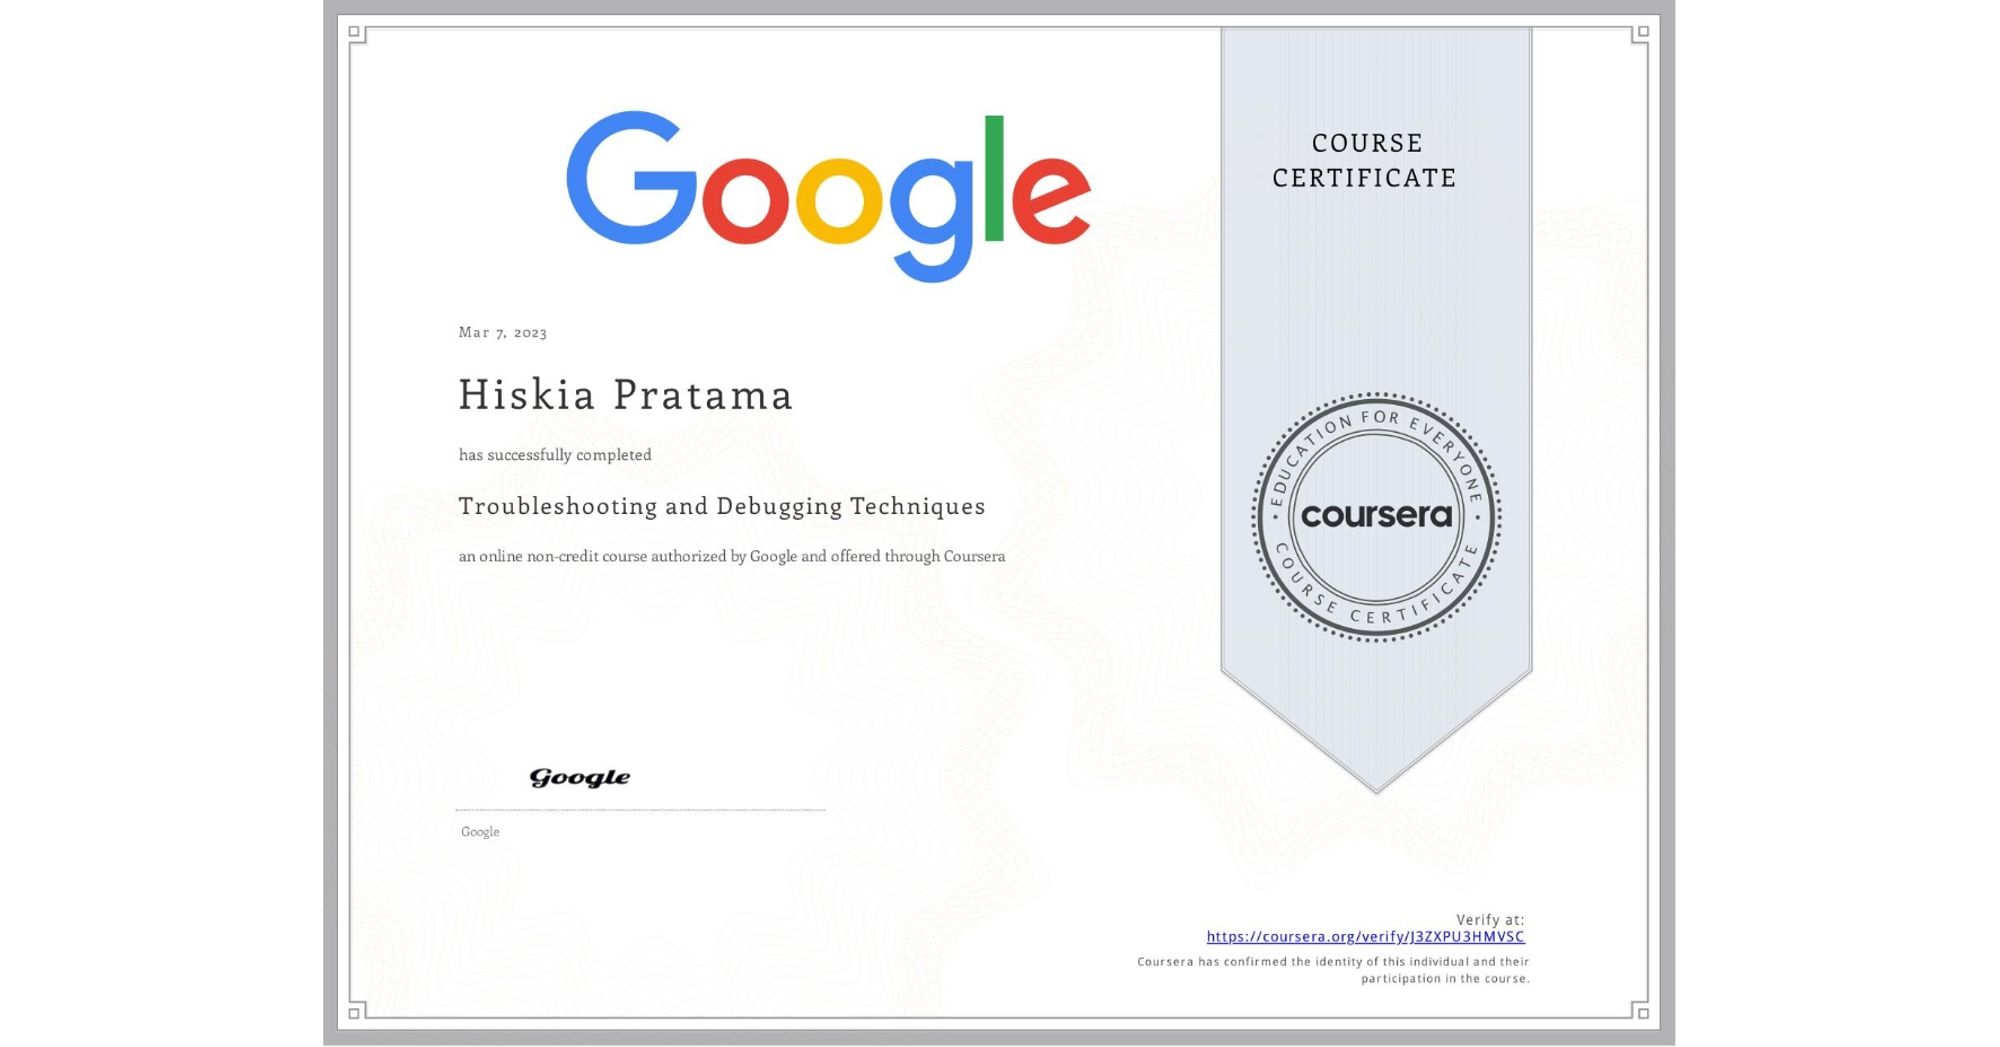 Completion Certificate for Troubleshooting and Debugging Techniques